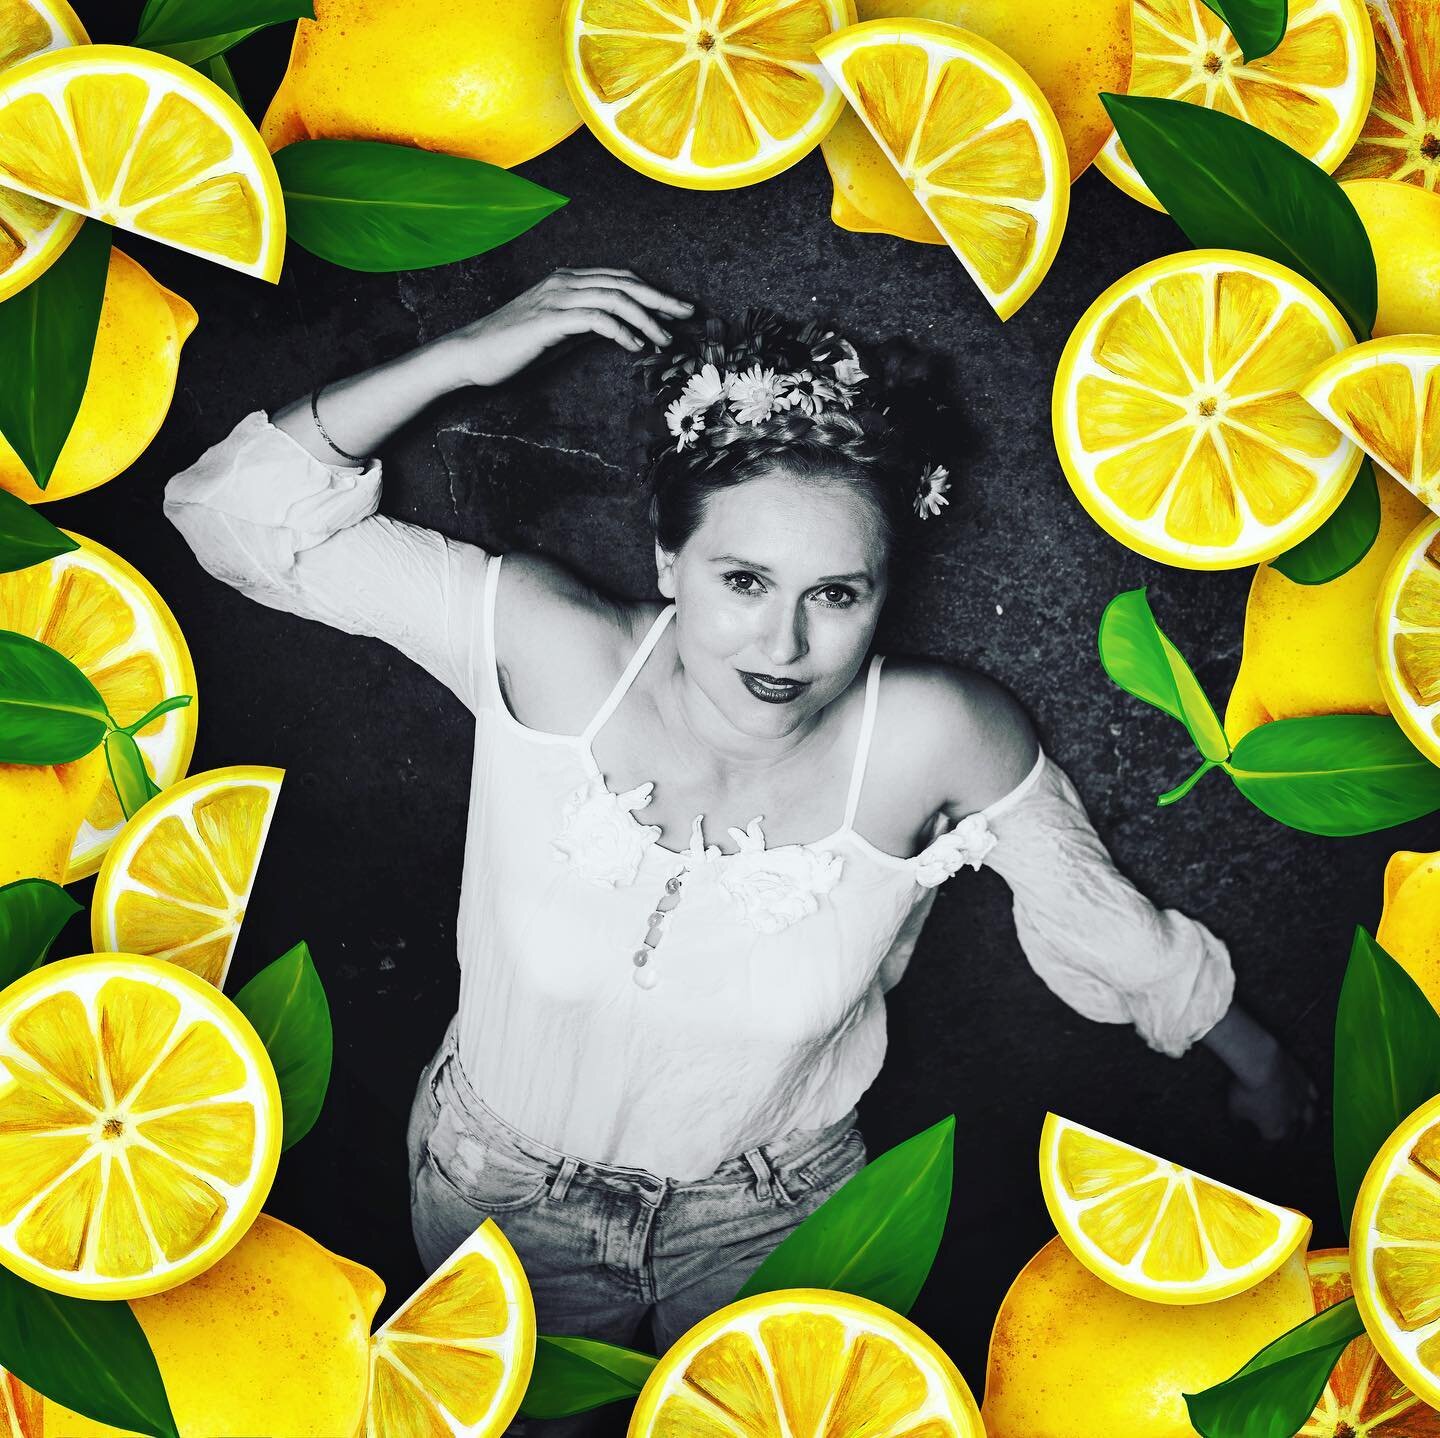 Maybe you asked yourself what this lemon stuff is all about 😉🍋....

Here is the answer: On the 25th of June my first Single &bdquo;Limonade&ldquo; in french will be released 😃!!! 
And I am so happy &amp; excited to share it with you very soon! Til